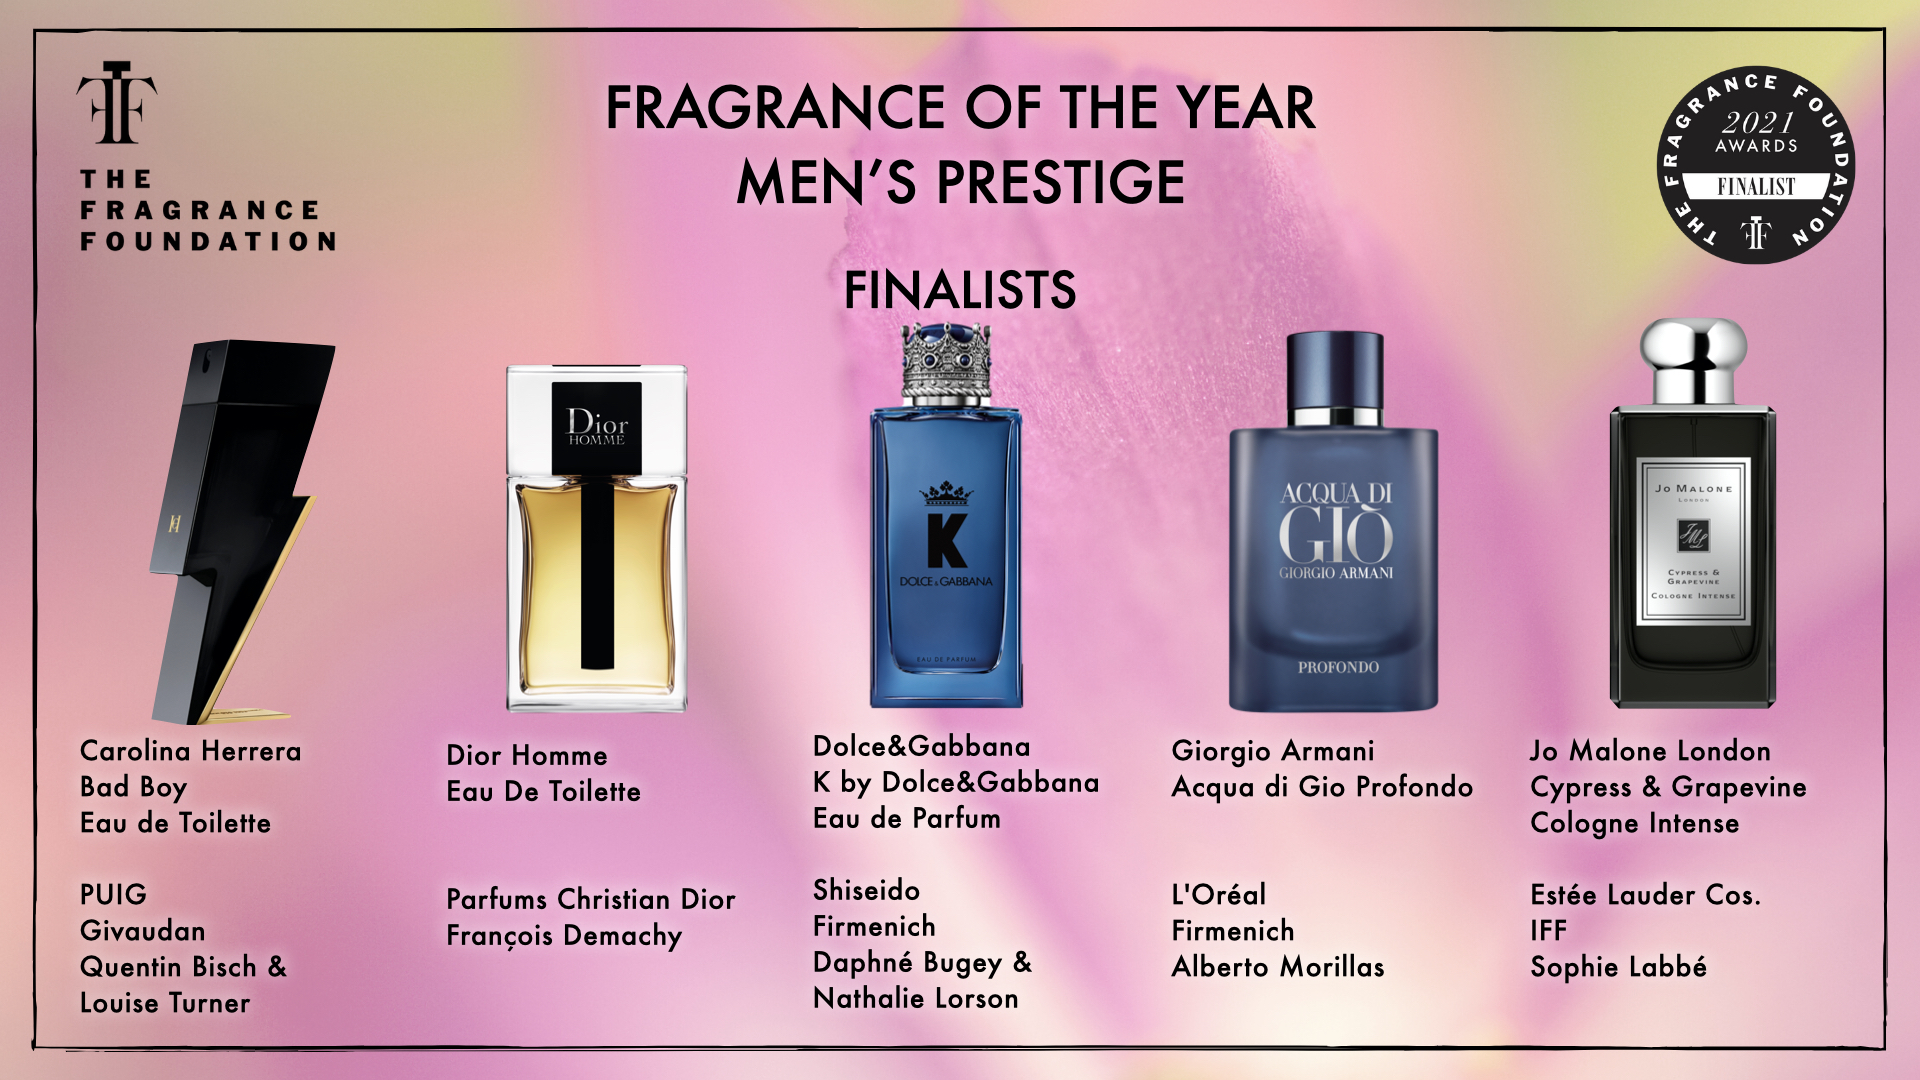 THE 2021 AWARDS FINALISTS’ WEBINAR APRIL 14th — The Fragrance Foundation